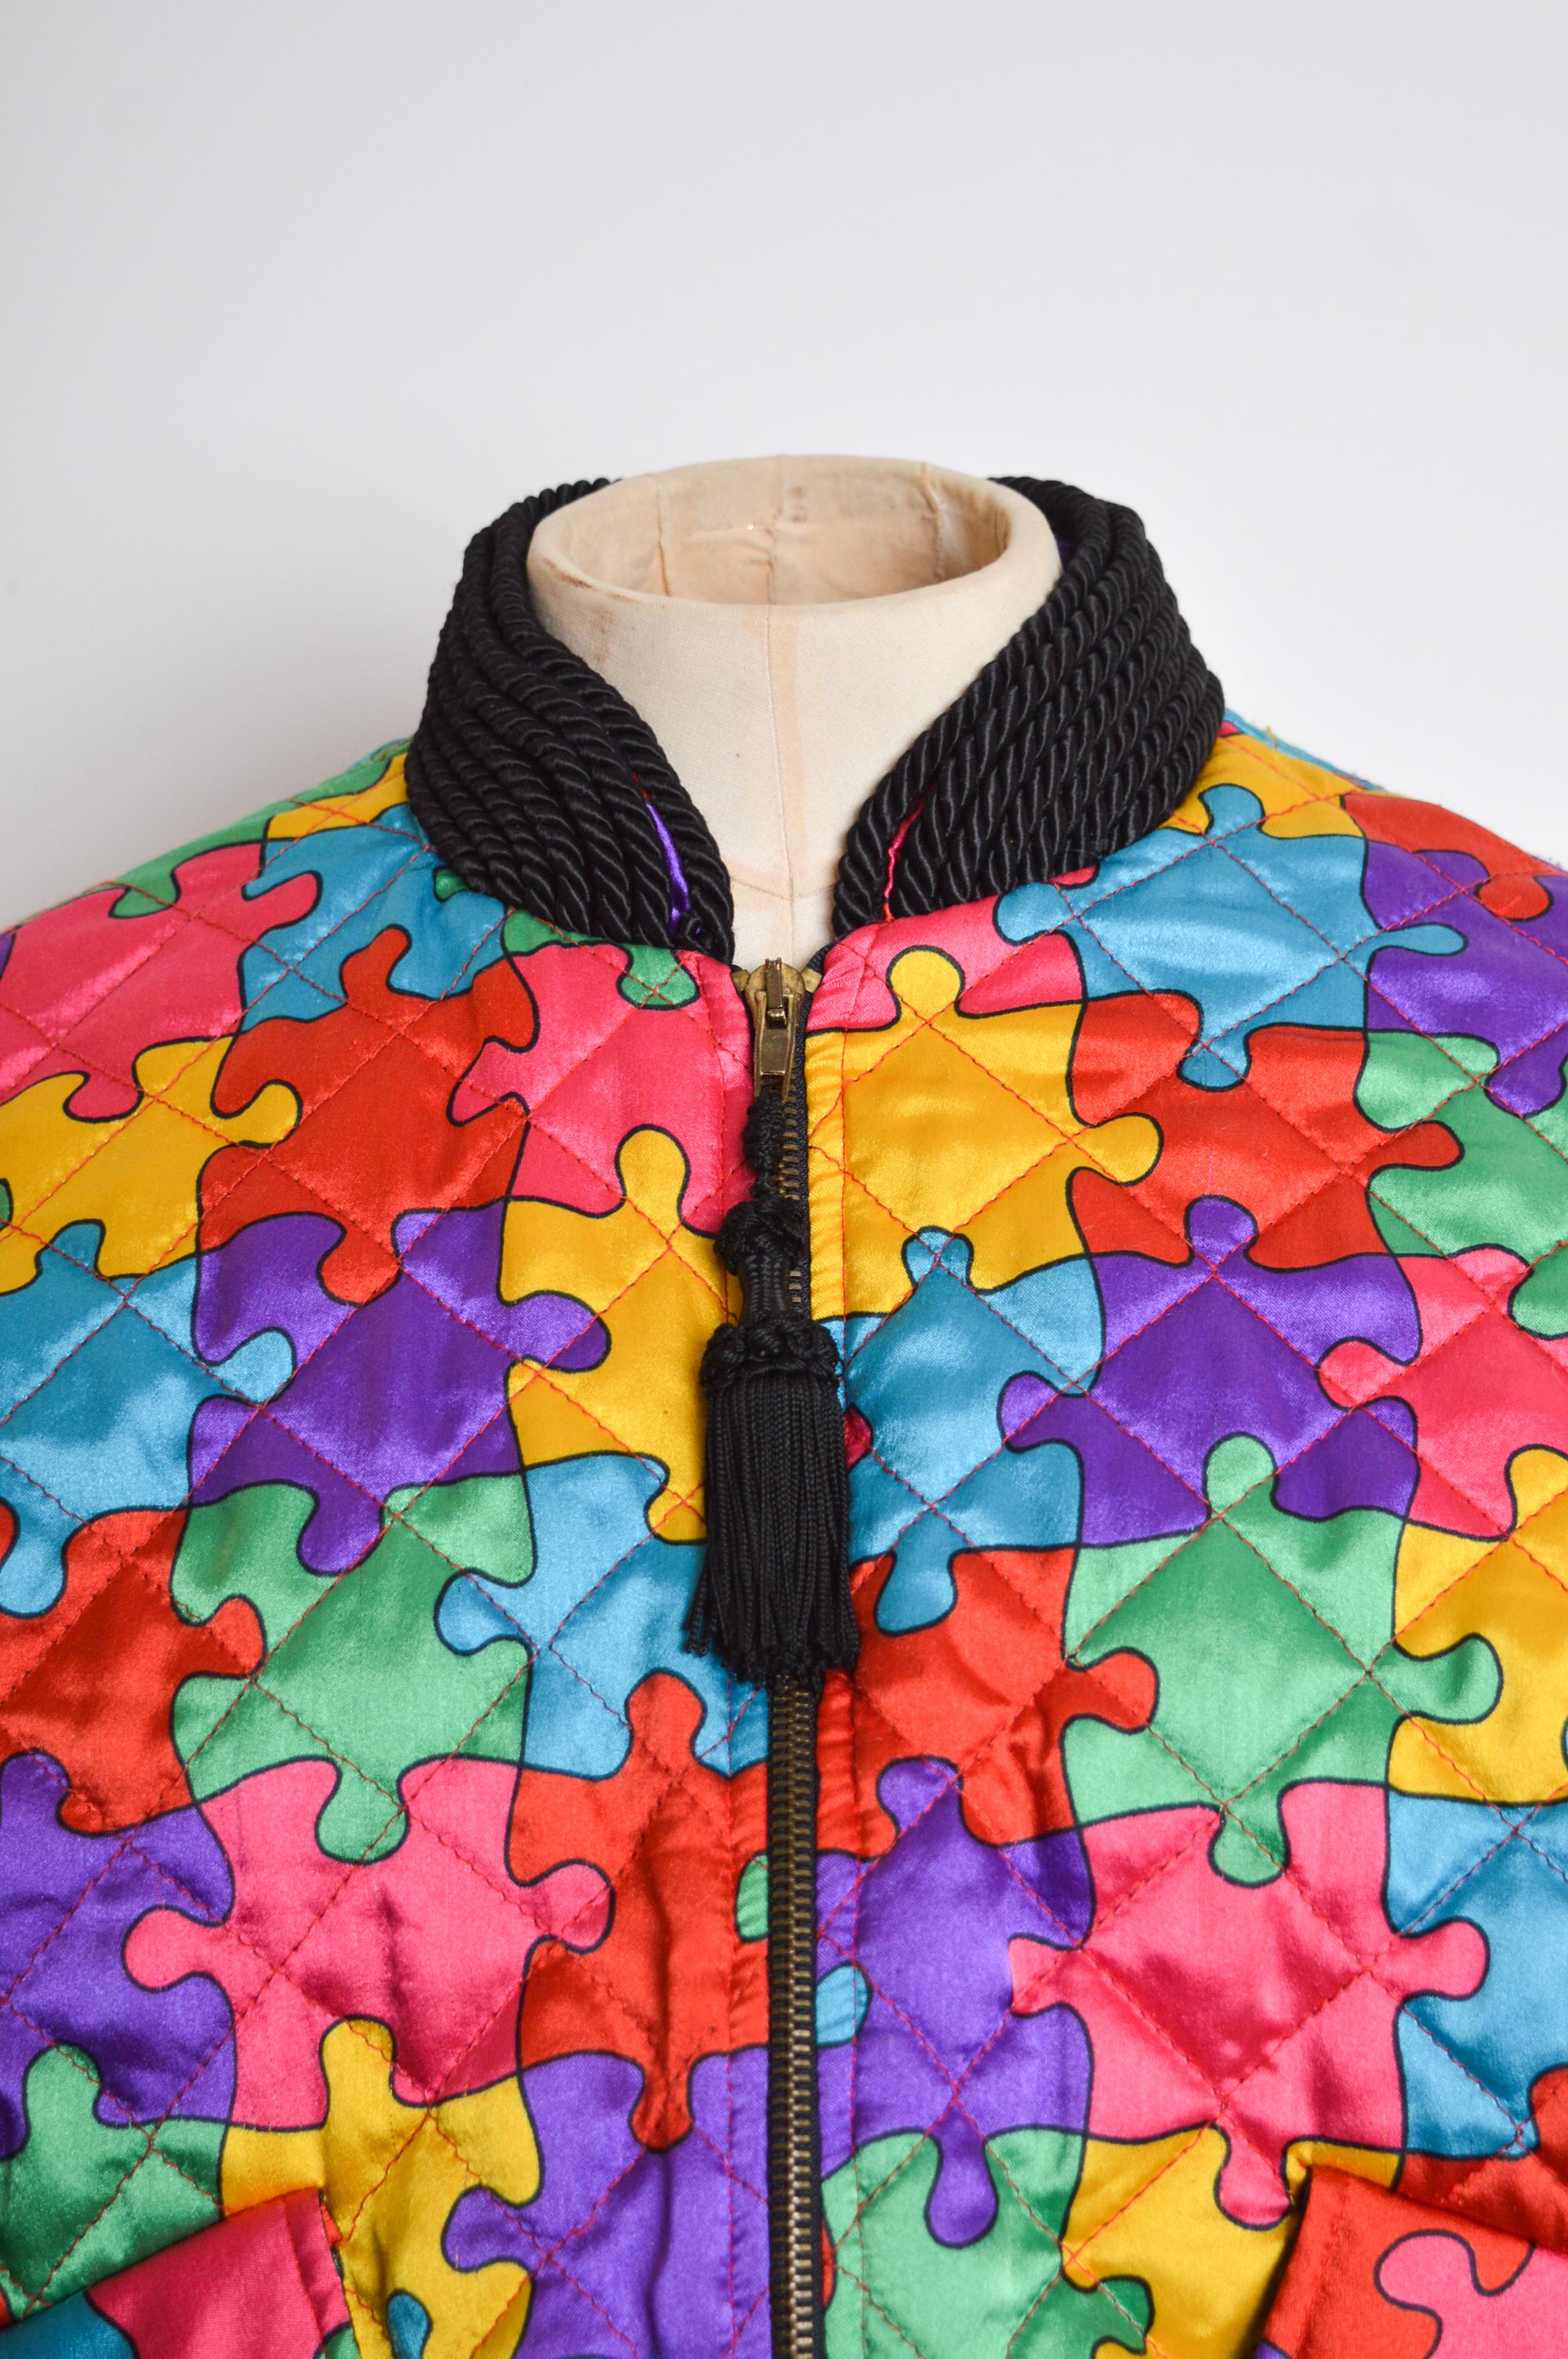 1992 Ab Fab Vintage Franco Moschino Colourful Satin Jigsaw Puzzle Bomber Jacket In Good Condition For Sale In Sheffield, GB